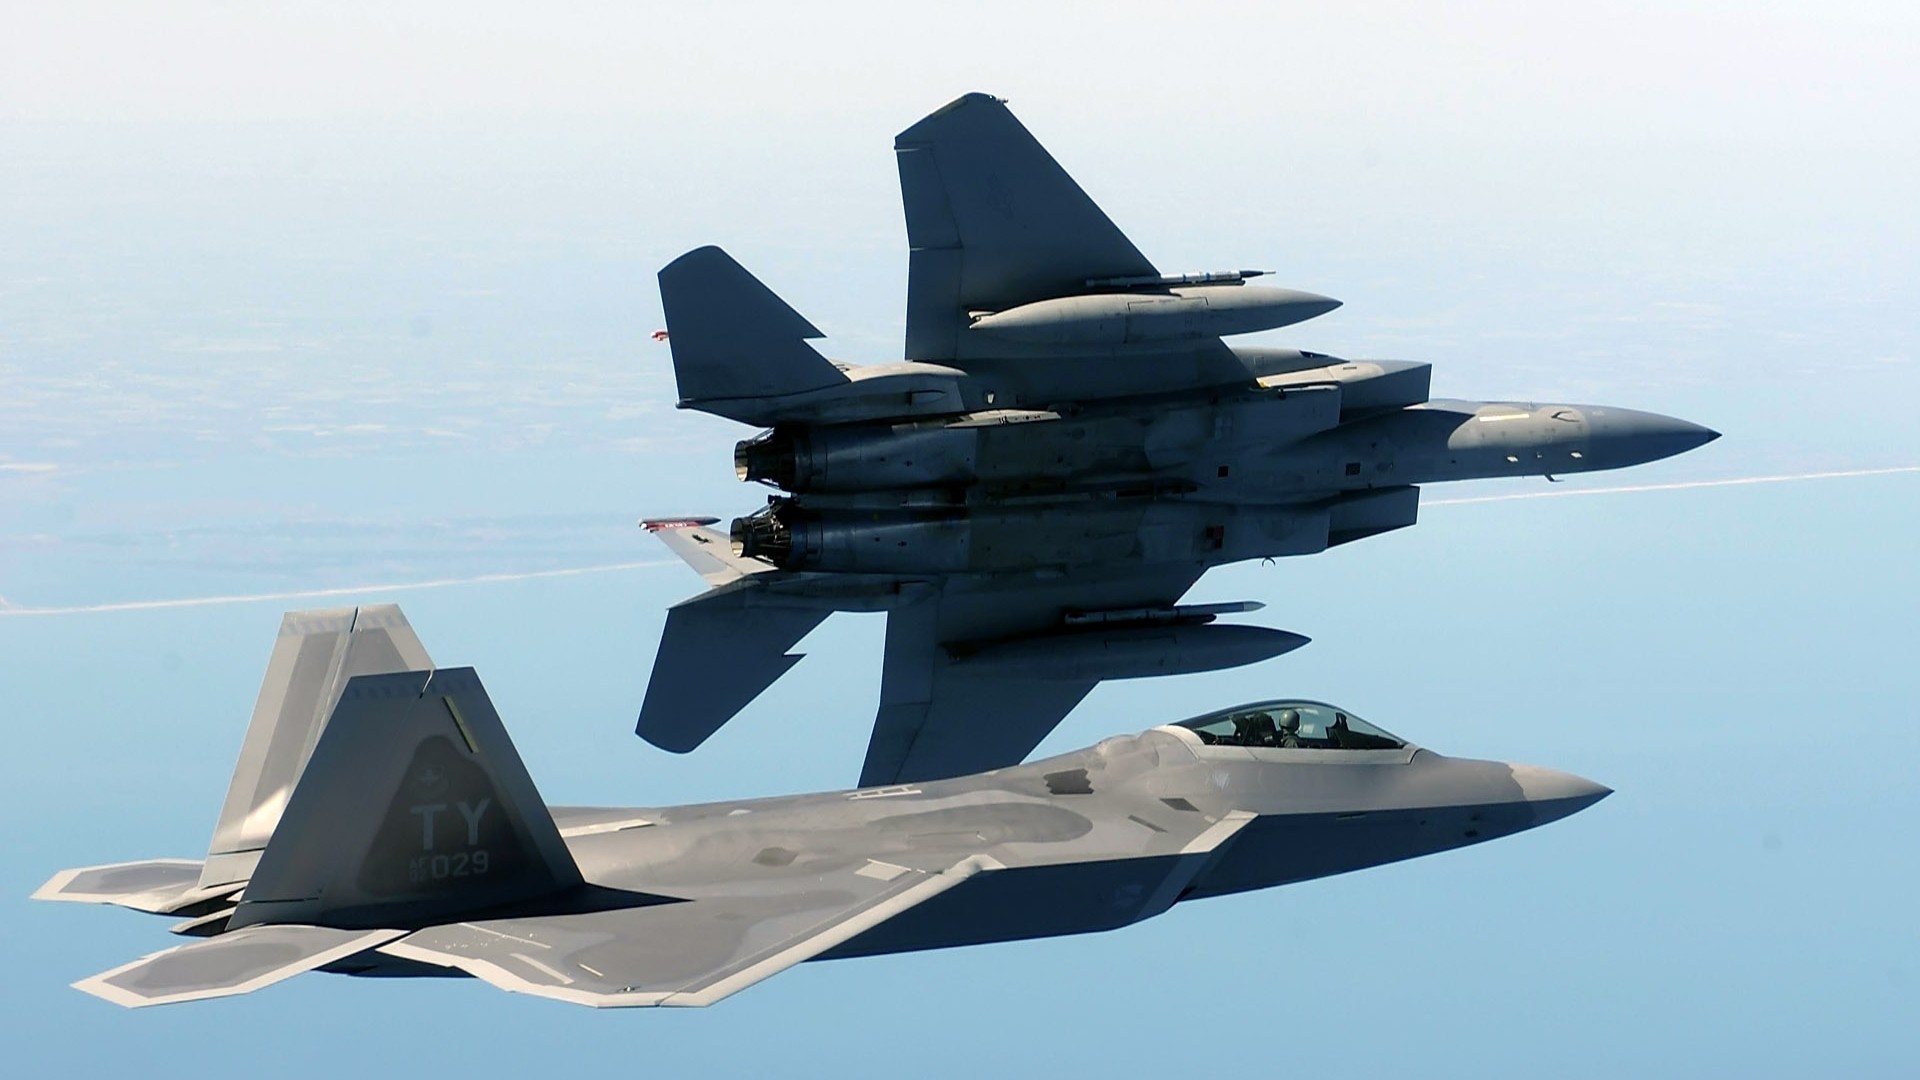 Military Aircraft Airplane Sky Jets F22 Raptor F 15 Eagle Military Aircraft 1920x1080